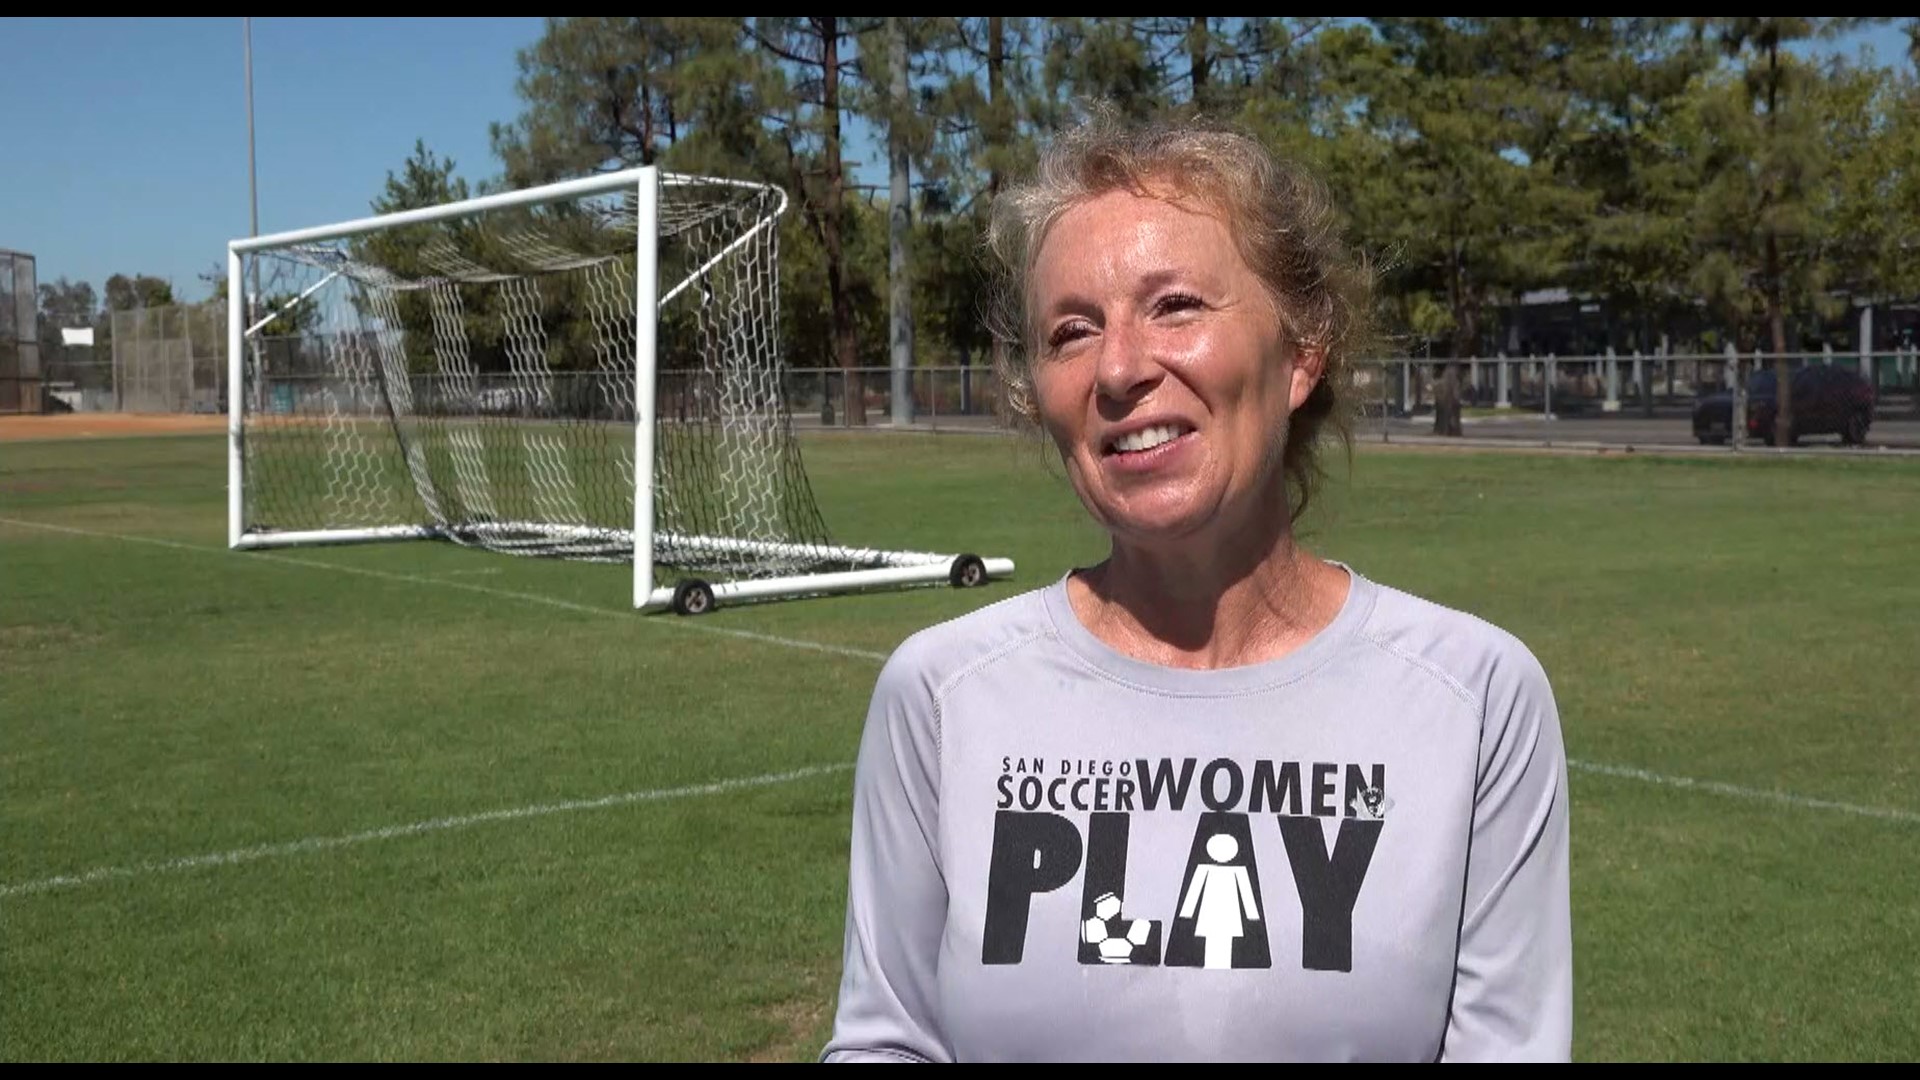 At age 45, Brandi Mitchell is the newest member of the women's soccer team and also attends class with her 18 year old son.